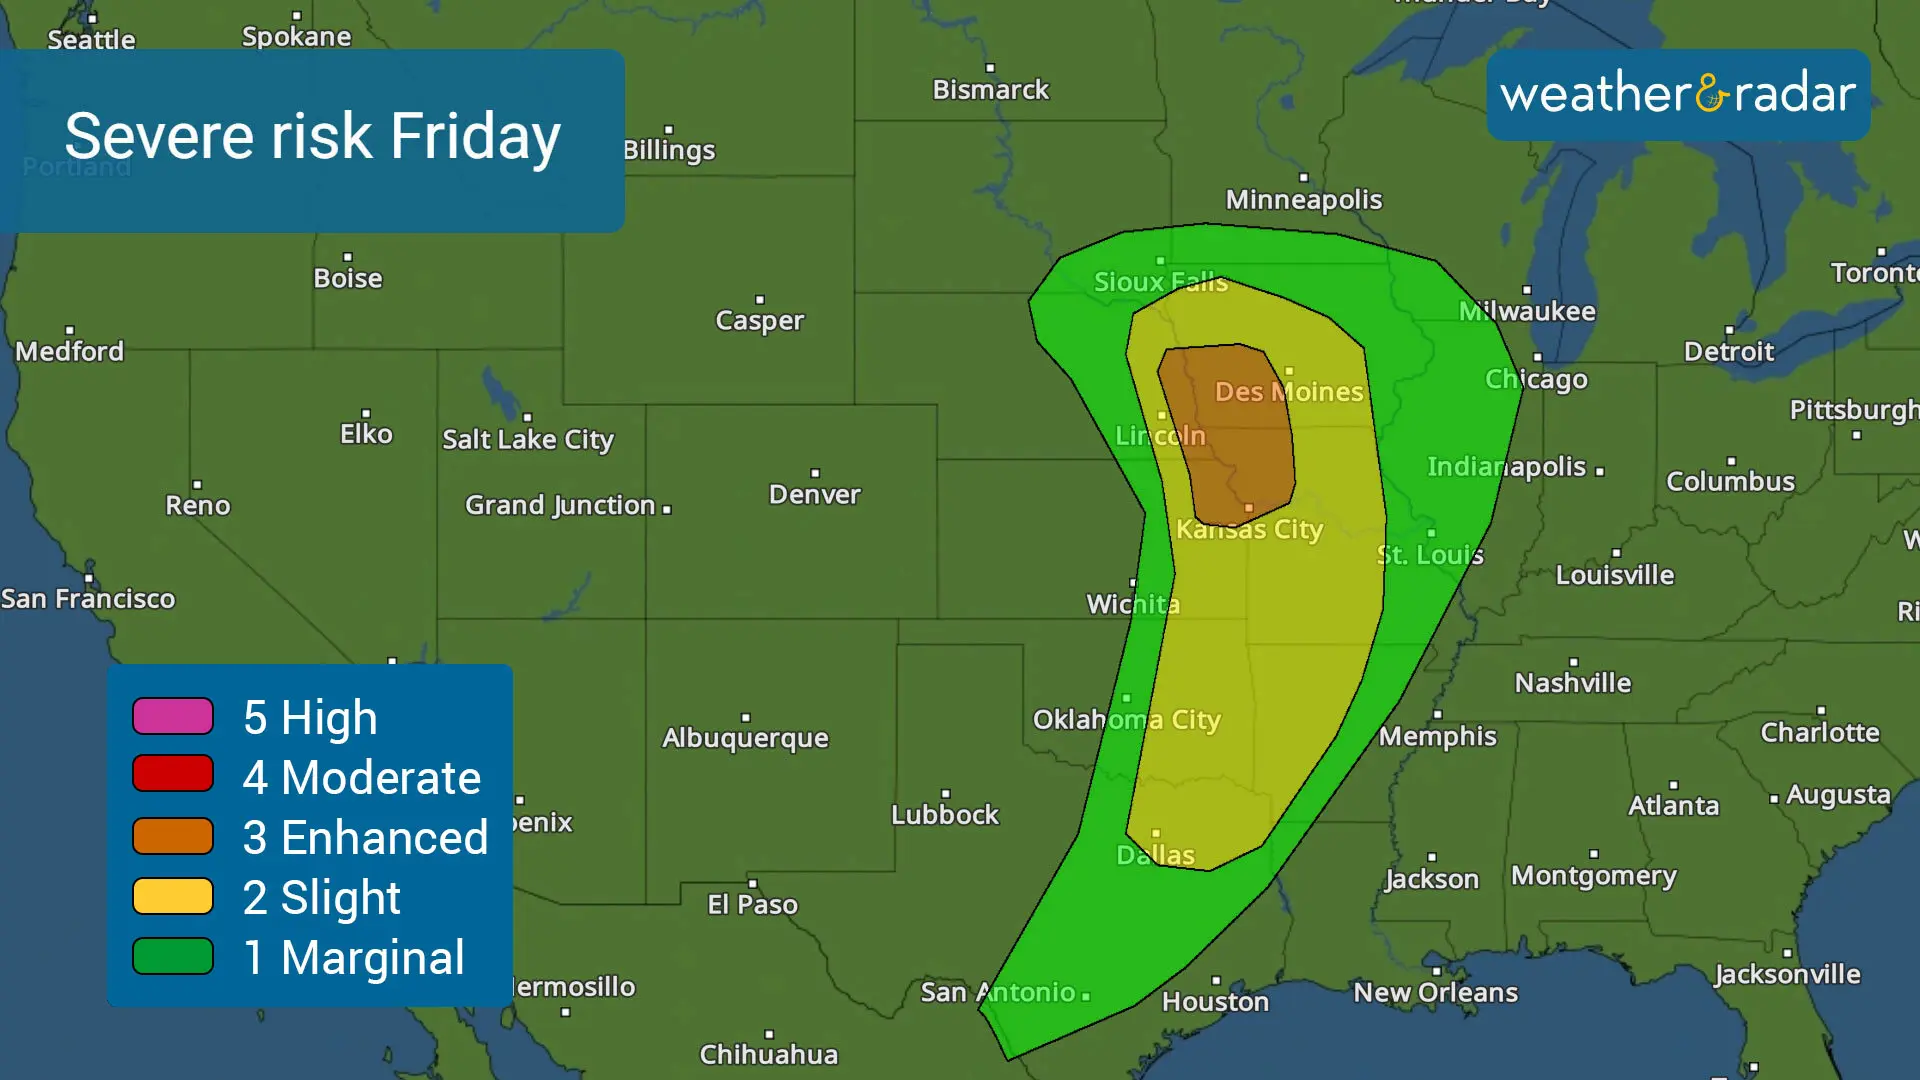 Over 3.5 million people at risk of numerous storms and tornadoes on Friday. 